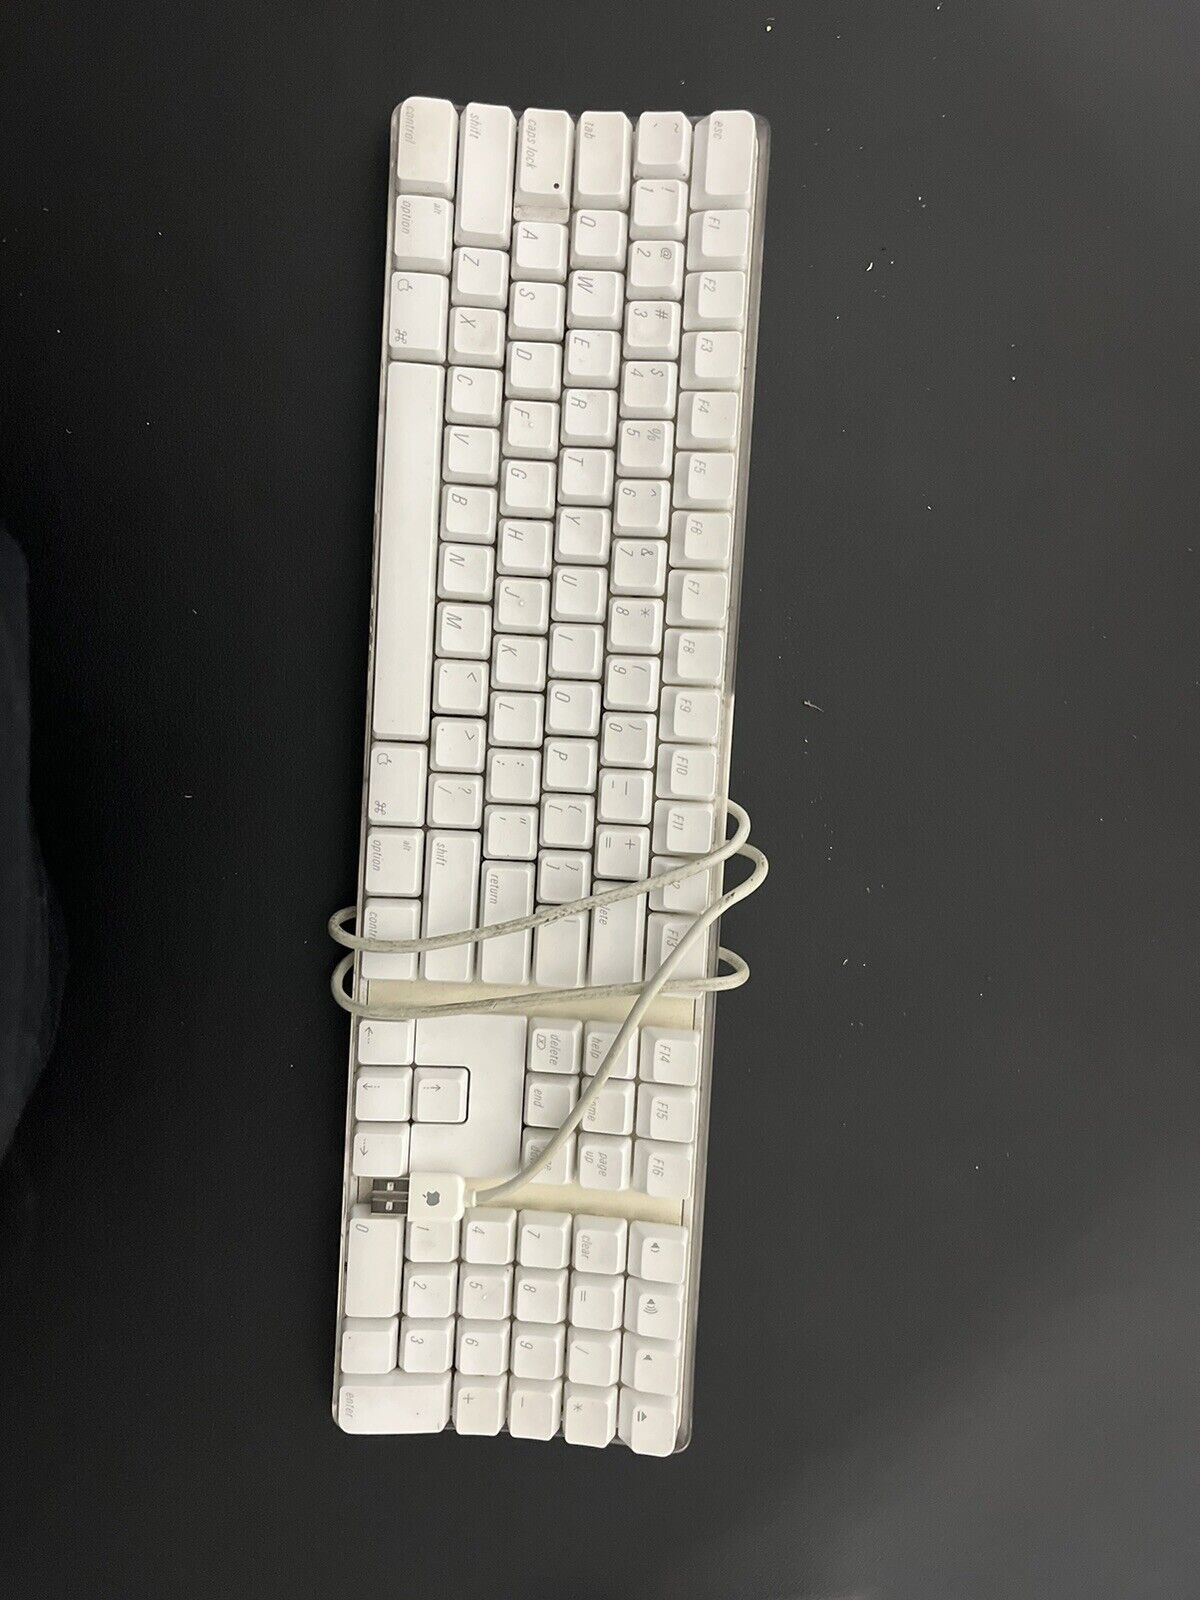 Rare APPLE - Original Wired USB Keyboard - White A1048 - Works Perfectly